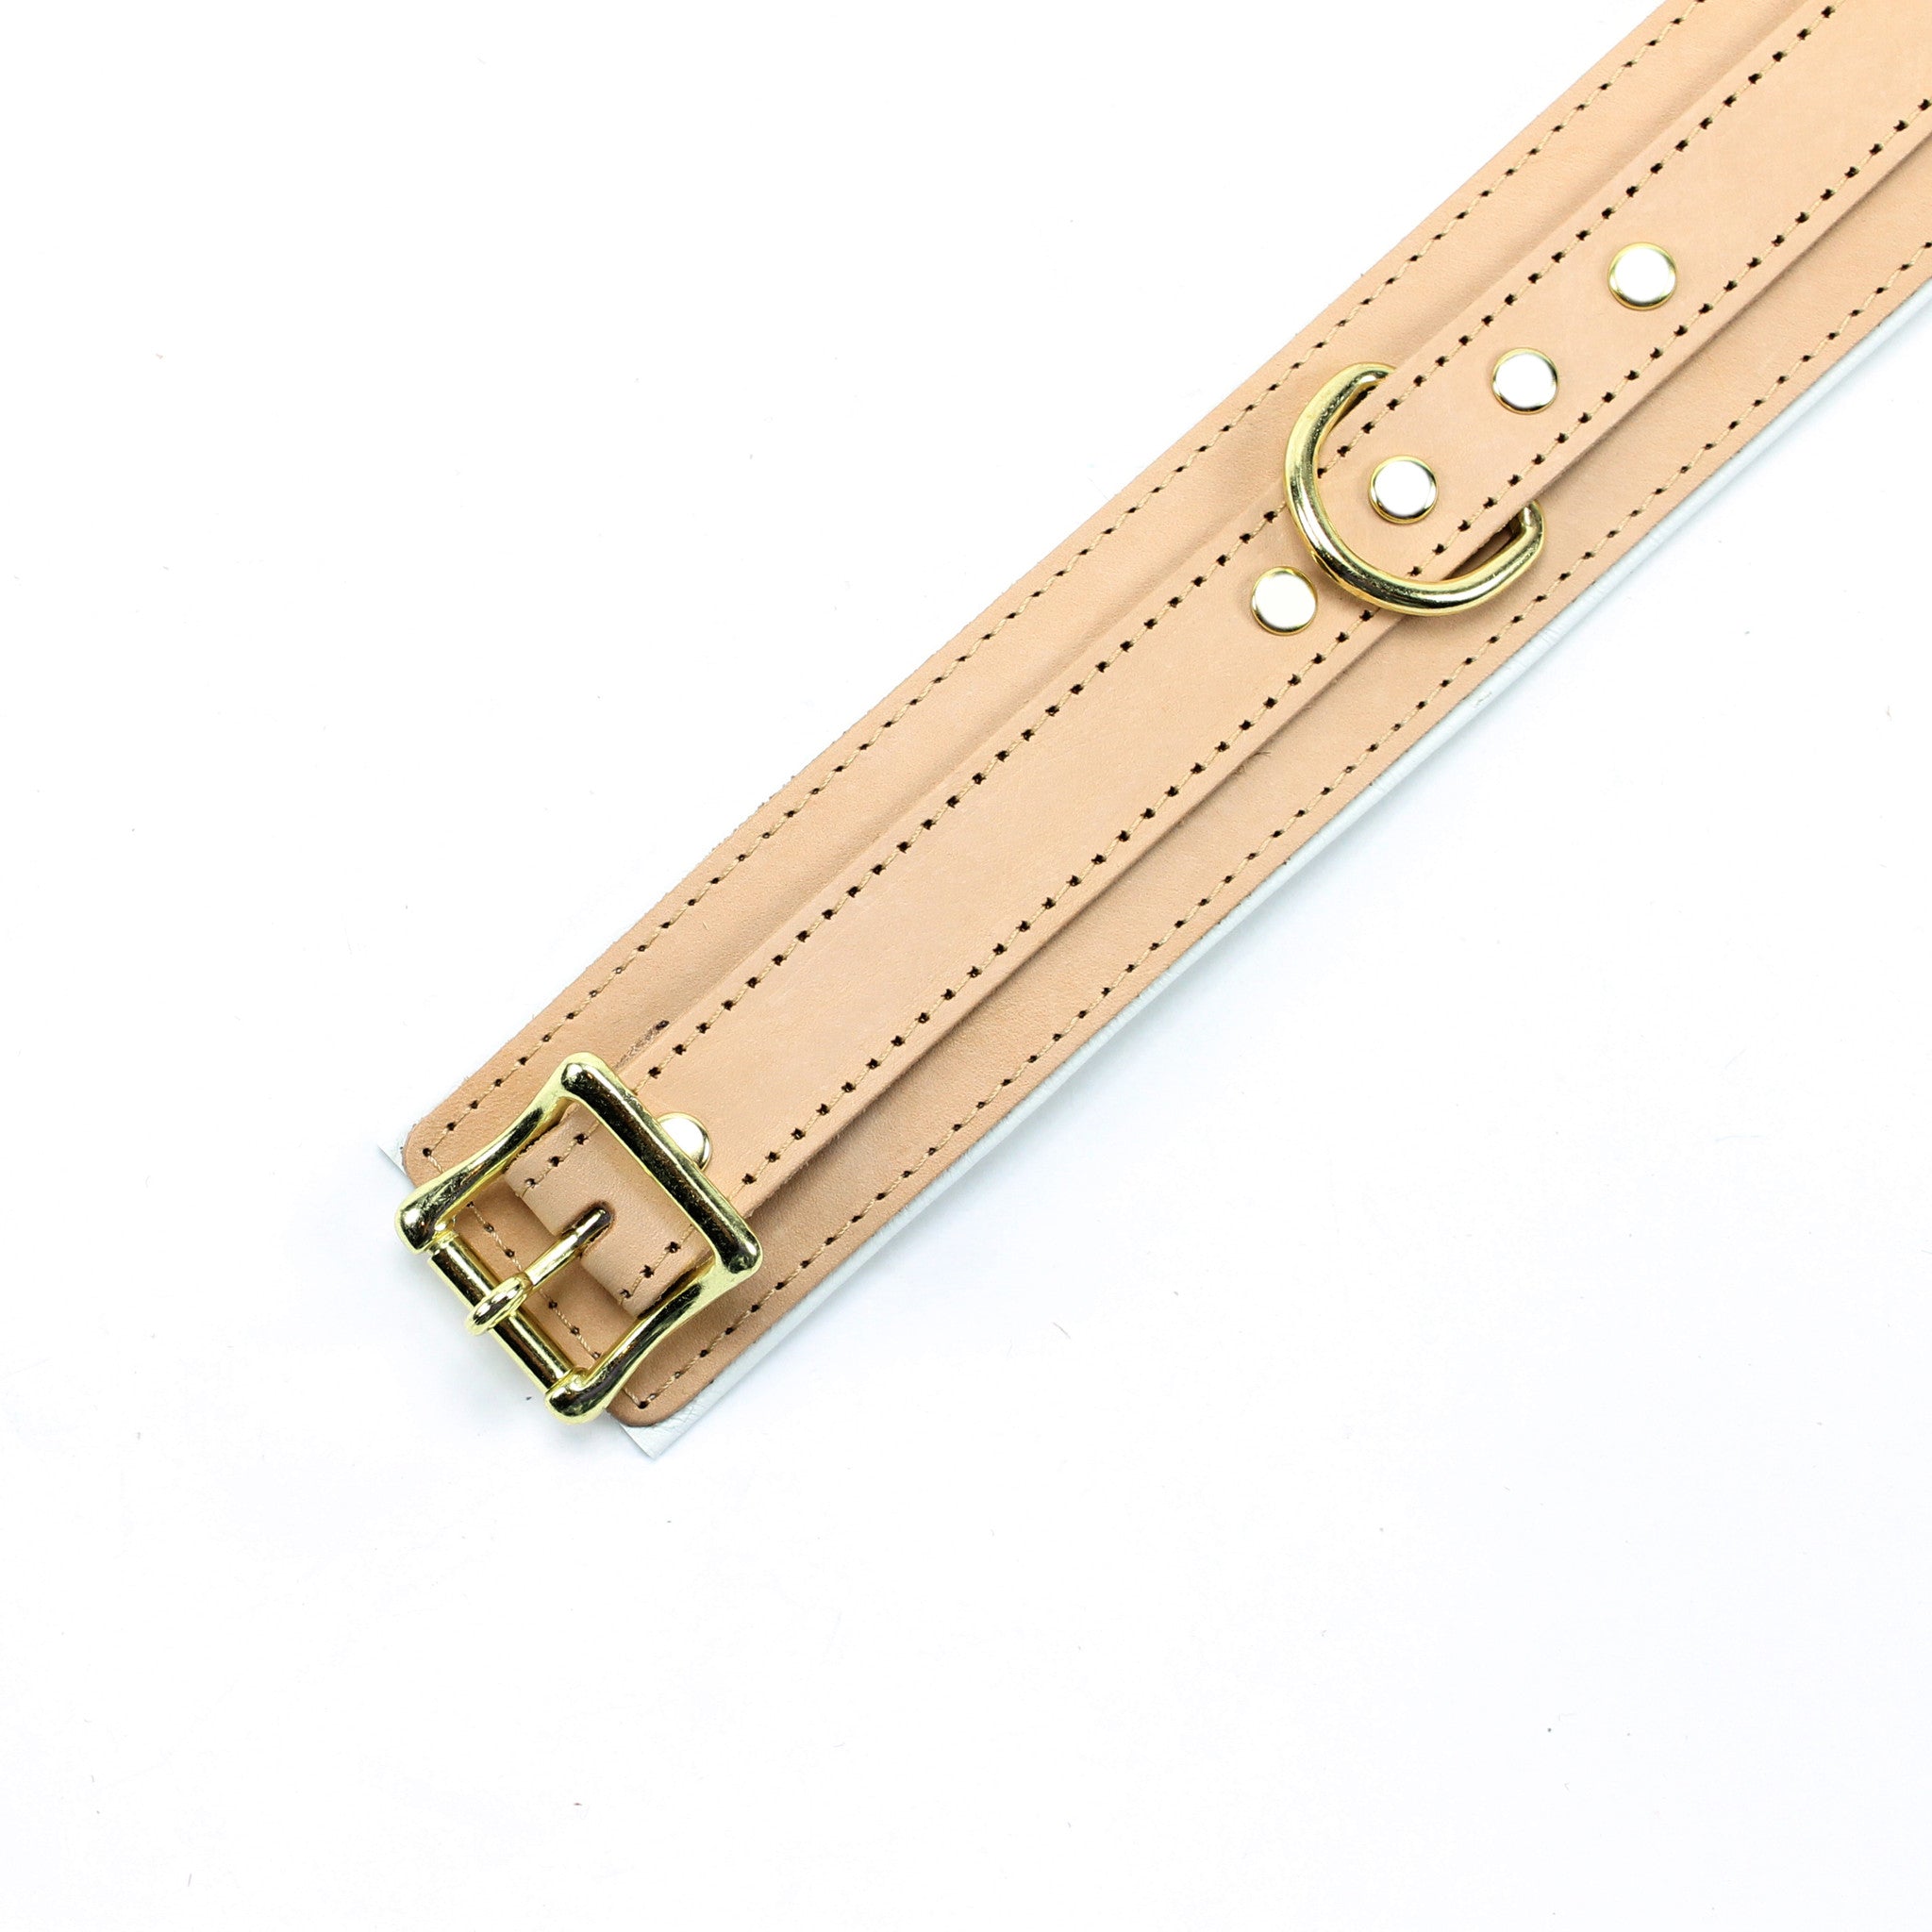 Galen Tan Leather BDSM Medical Collar with Gold-Plated Hardware